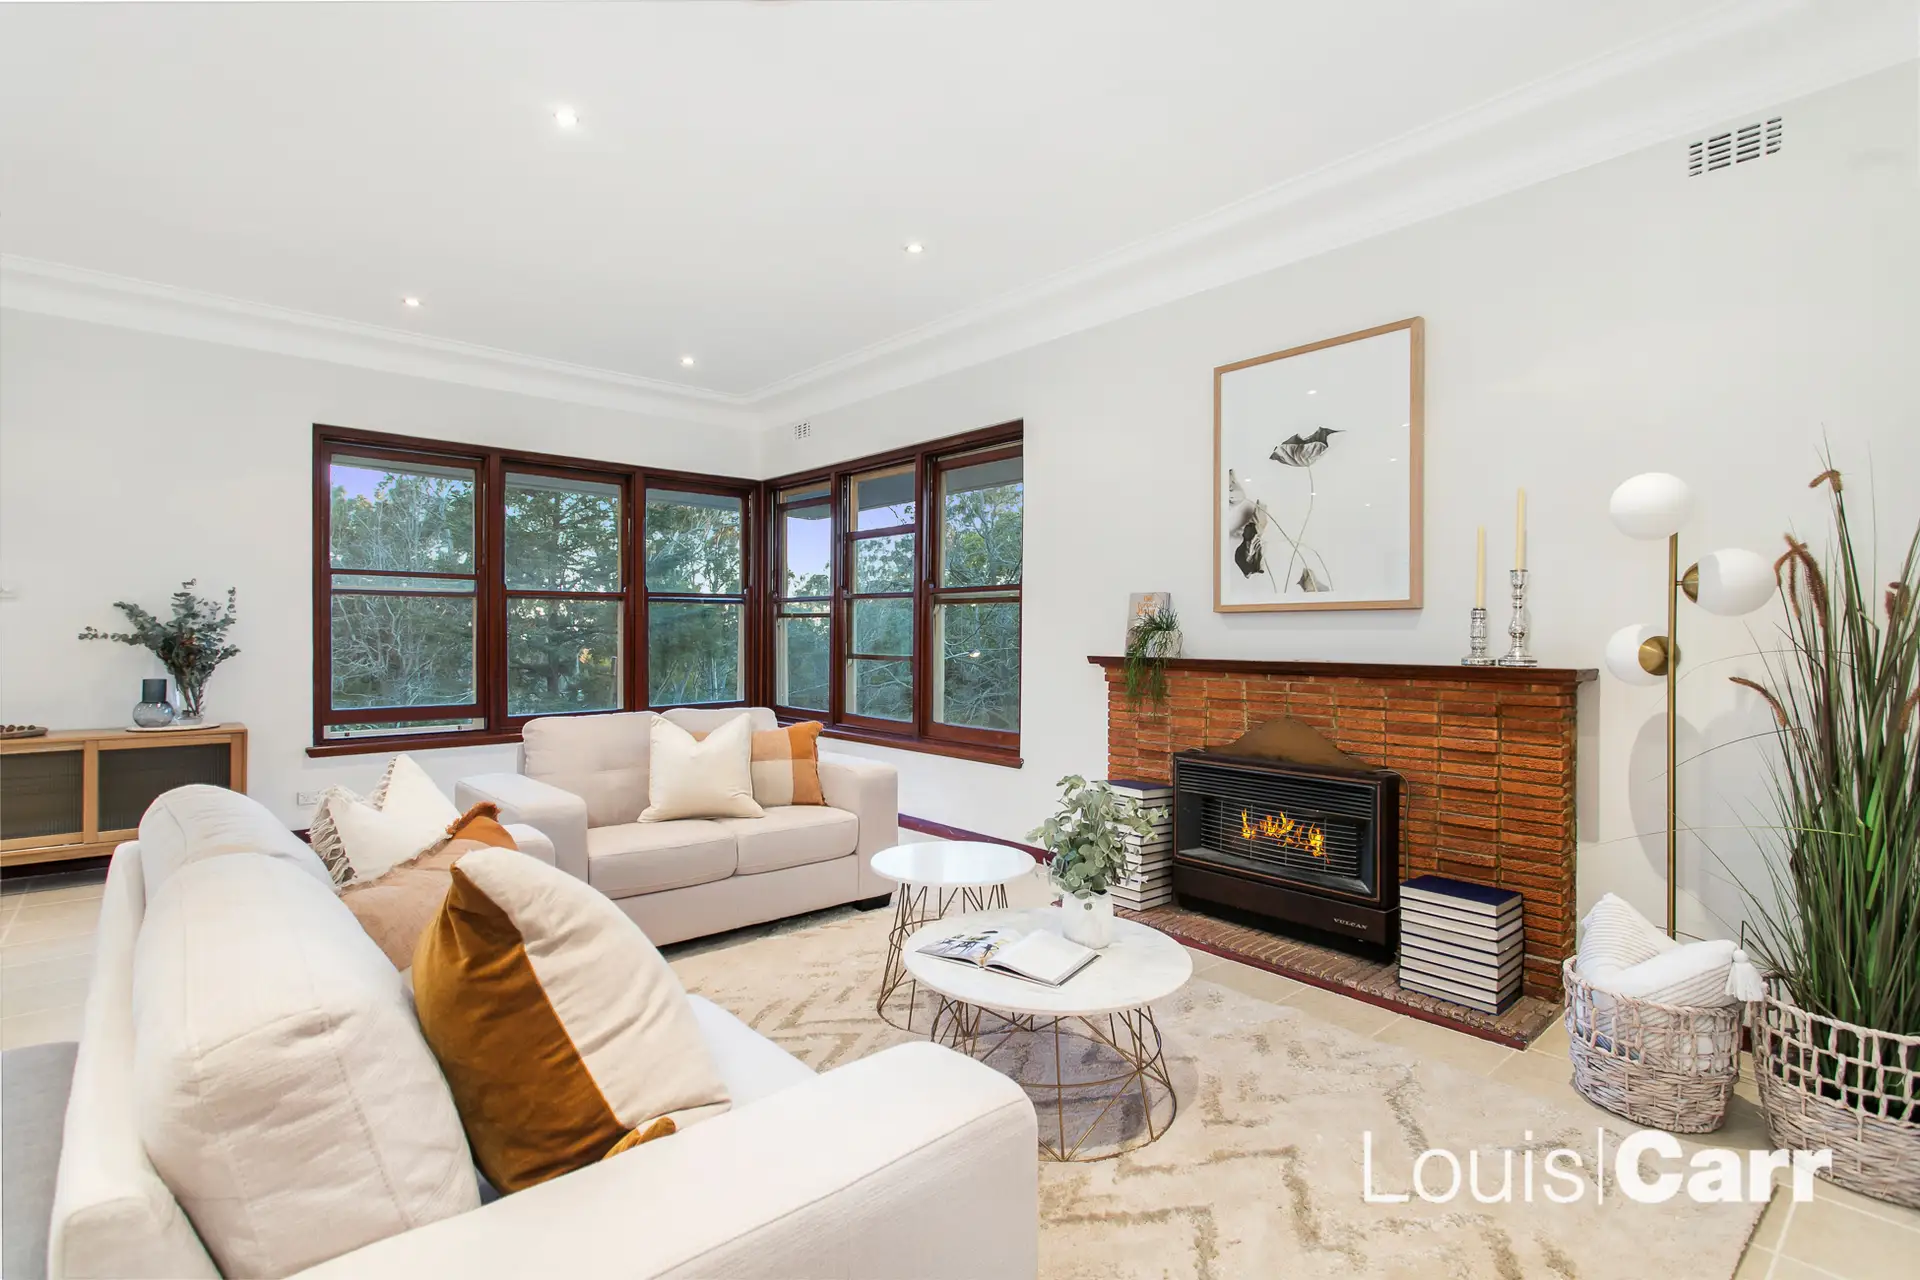 Photo #3: 501 Pennant Hills Road, West Pennant Hills - Sold by Louis Carr Real Estate